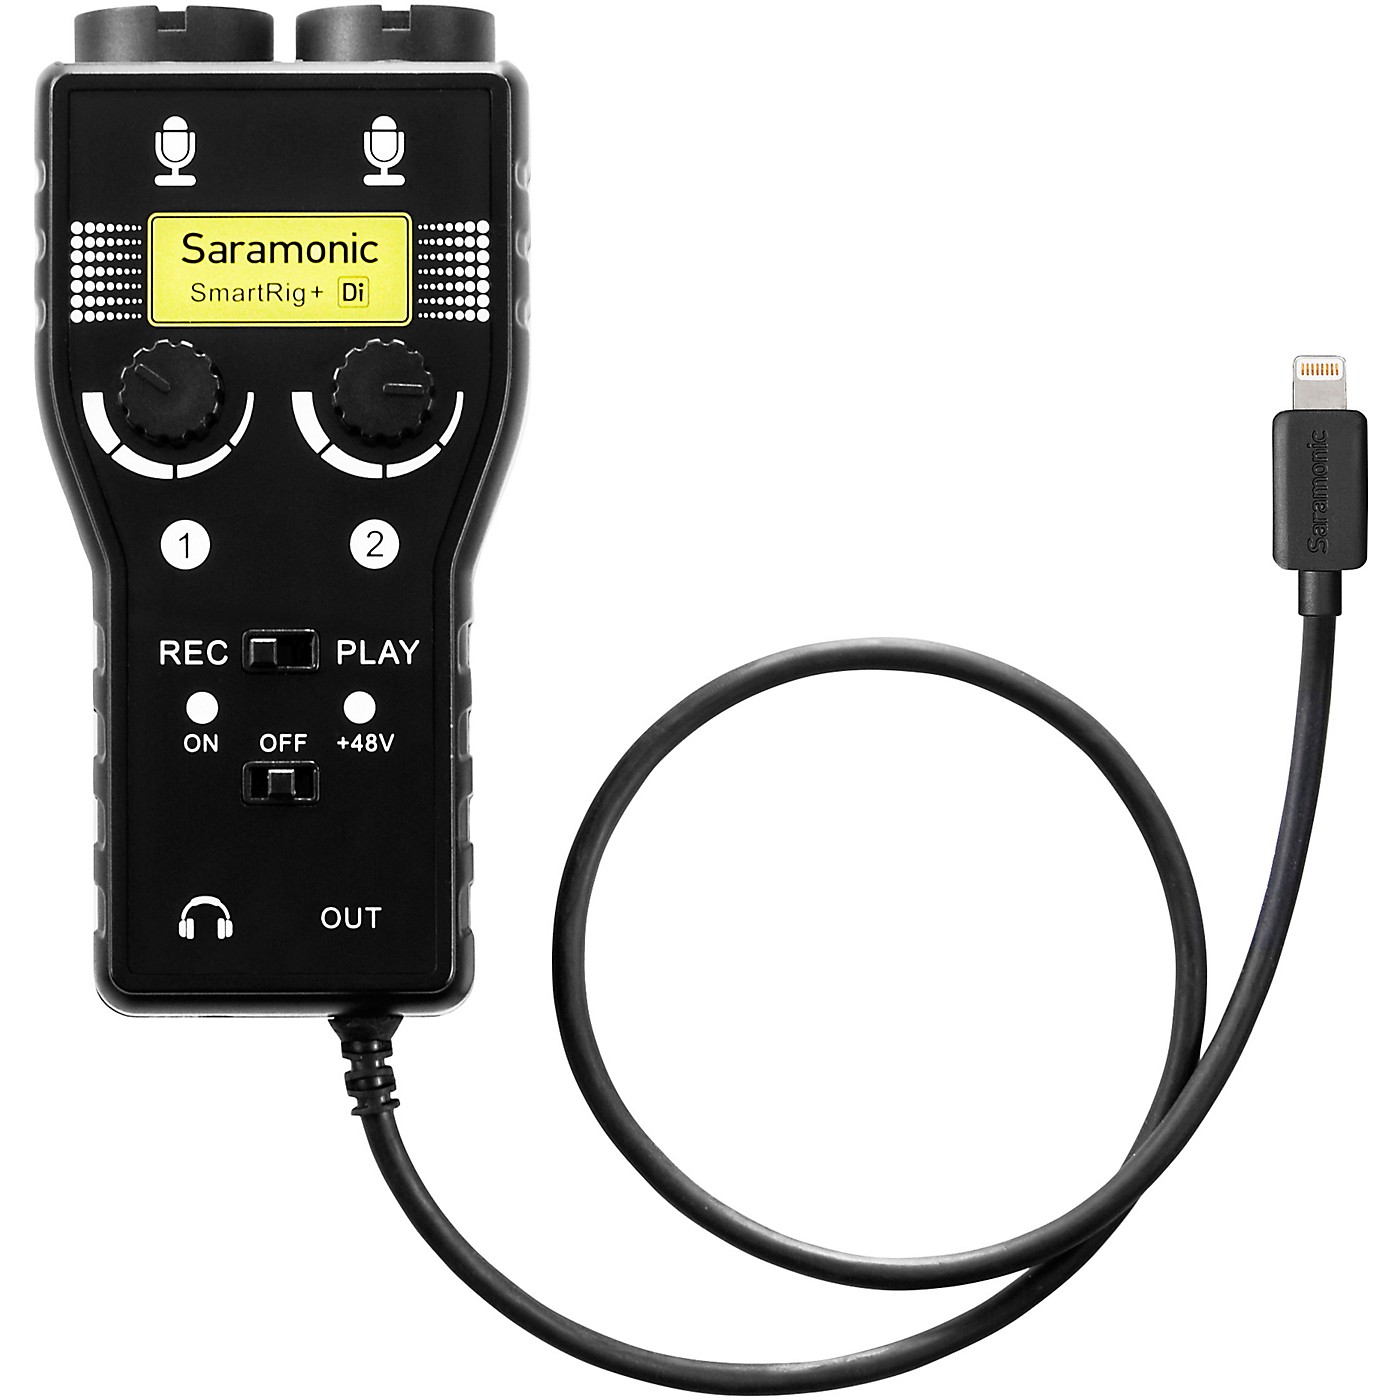 Saramonic SmartRig+DI (with Lightning Connector for iOS) 2CH XLR/3.5mm Microphone Audio Mixer thumbnail